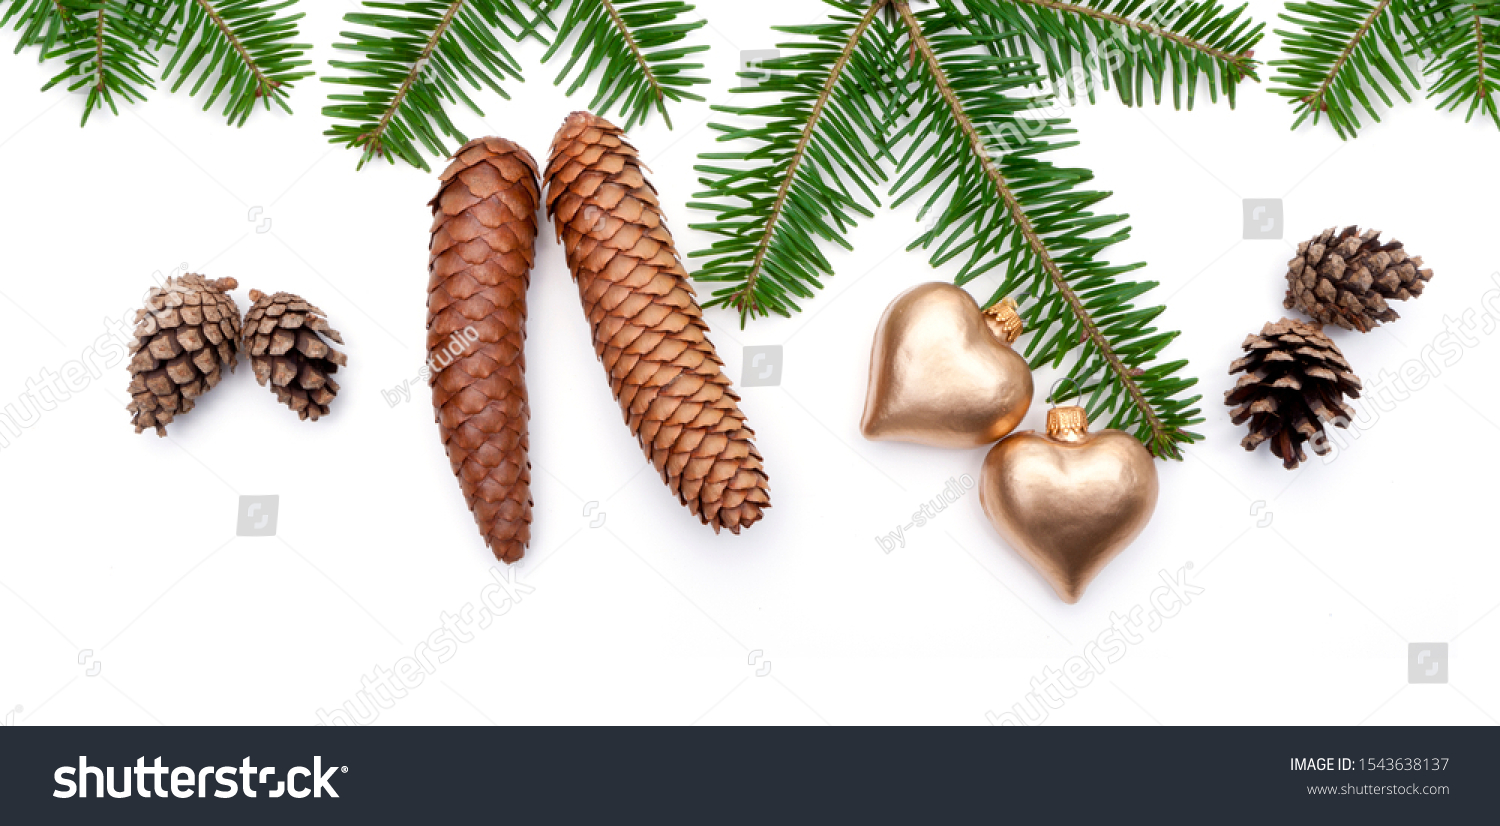 Evergreen fir branch with fir cone as decoration isolated on white background #1543638137